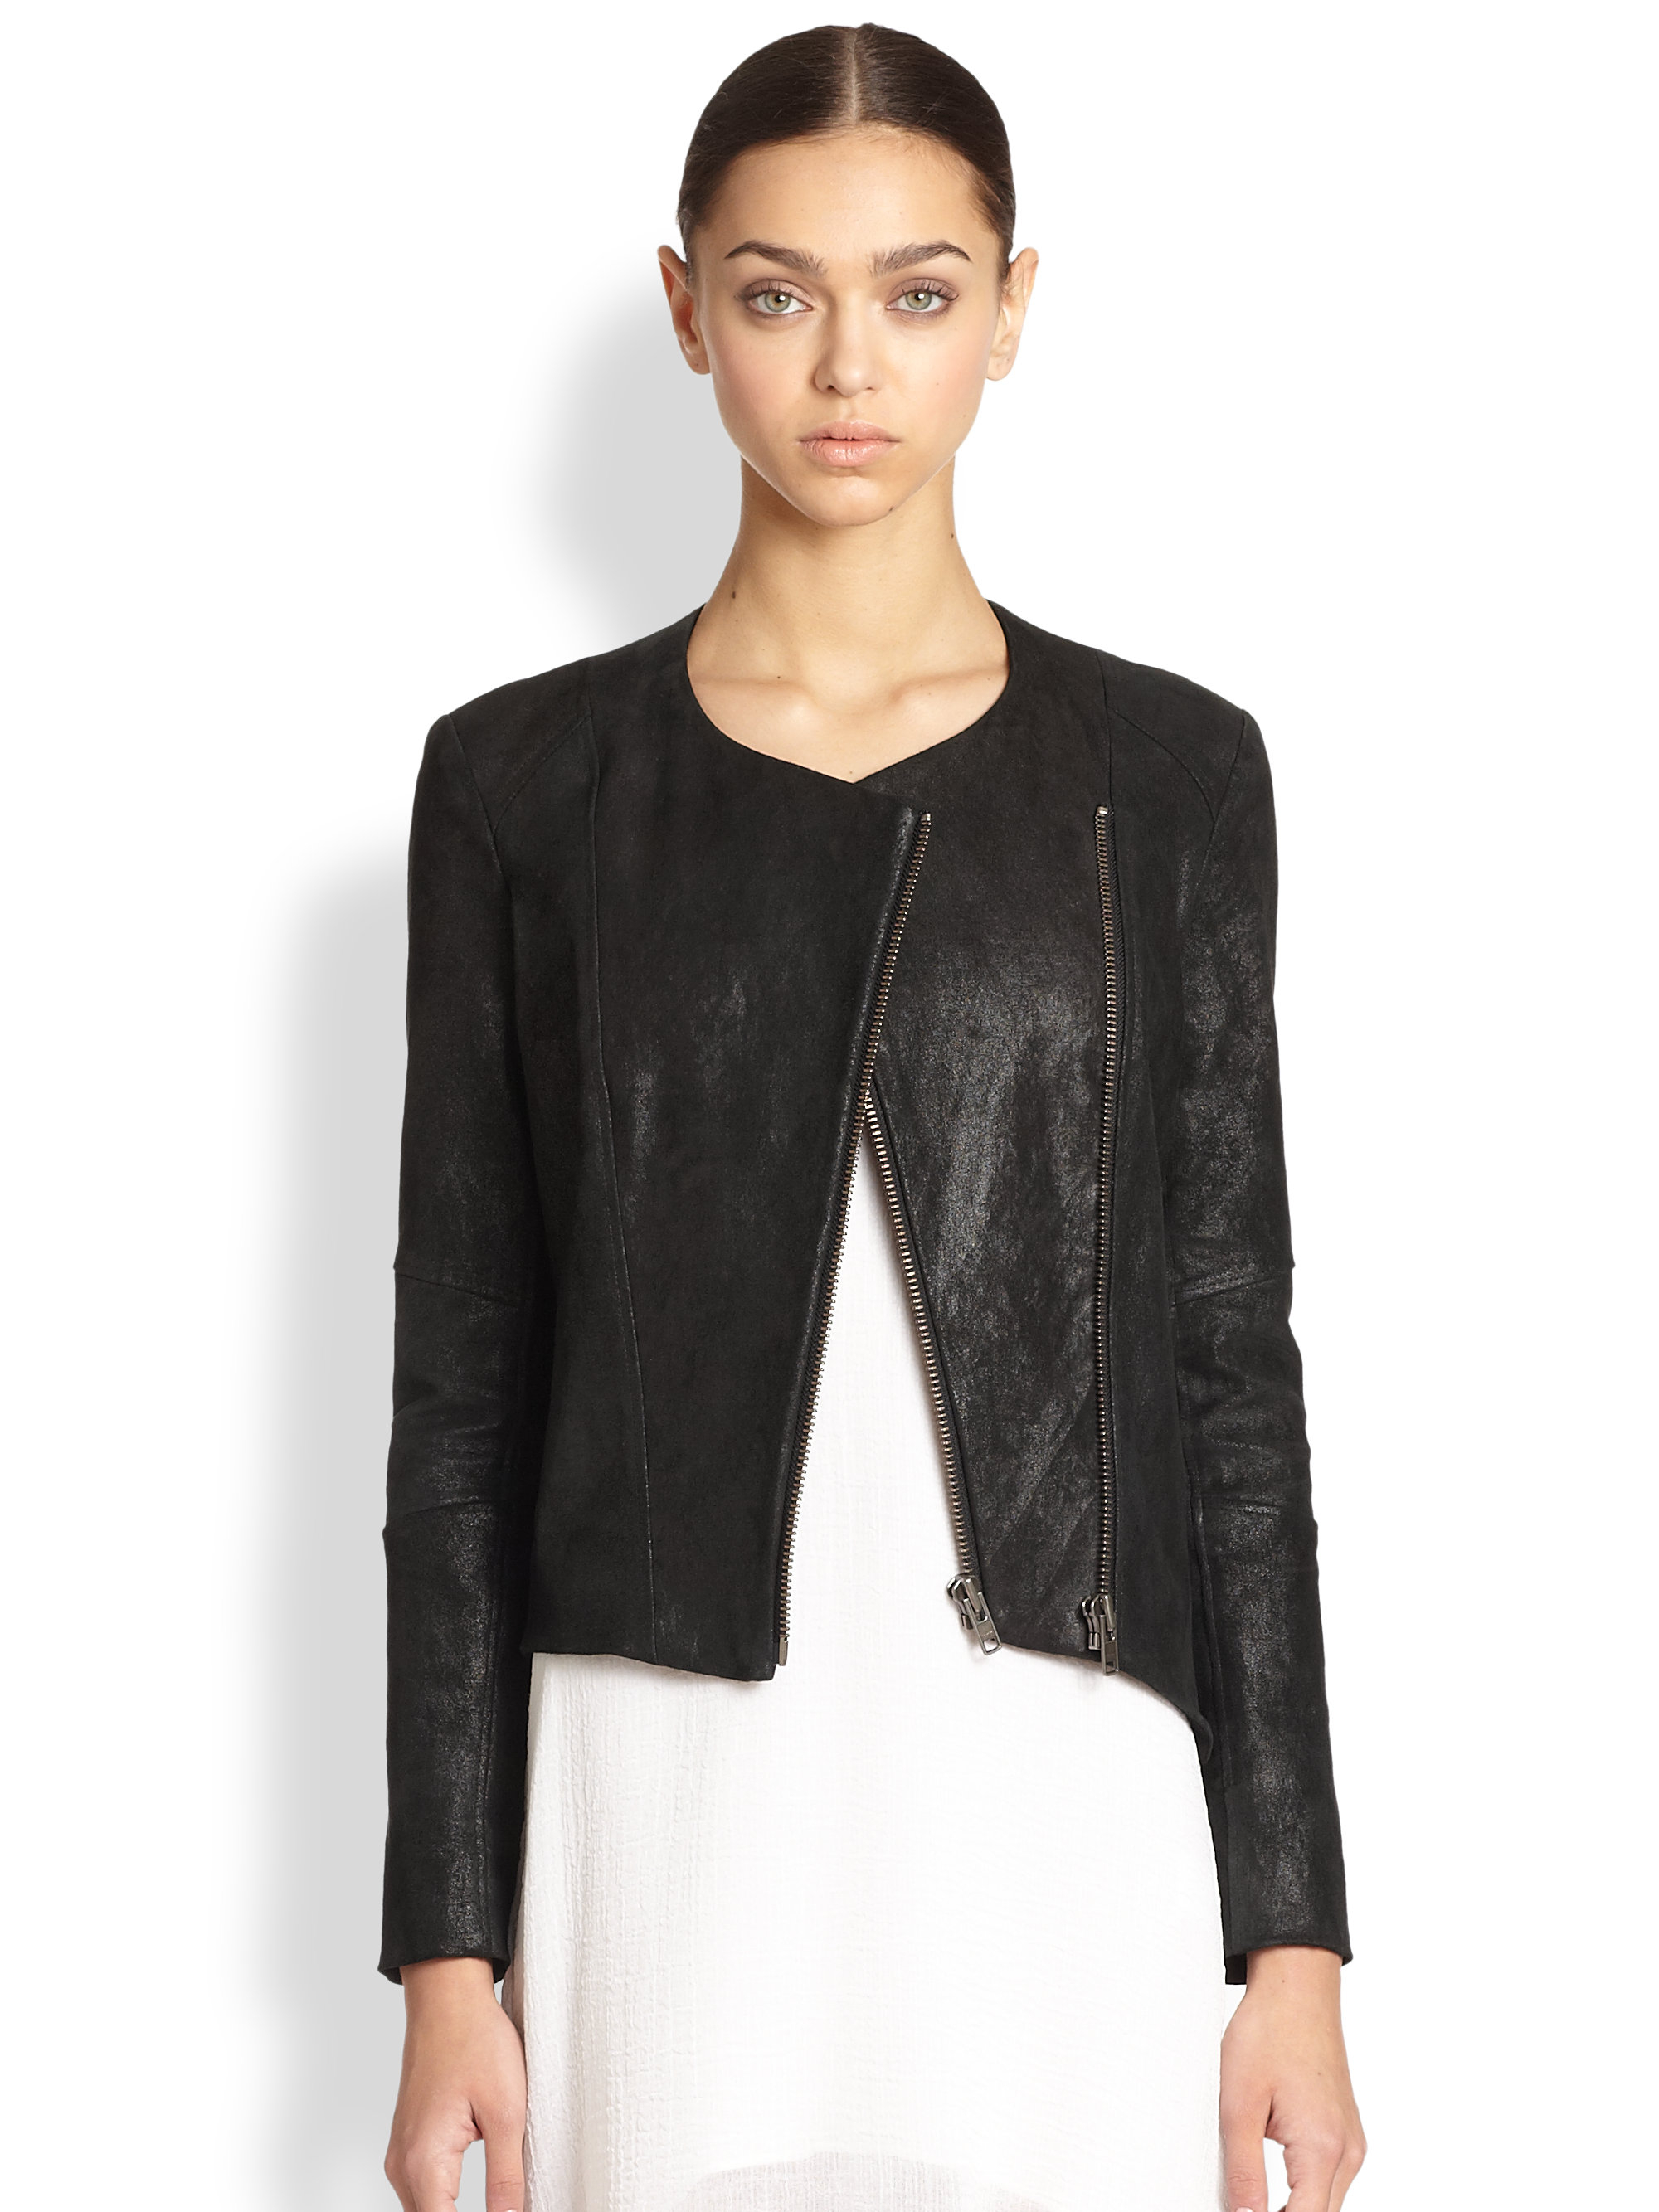 Lyst - Helmut Lang Patina Asymmetrical Brushed Leather Jacket in Black